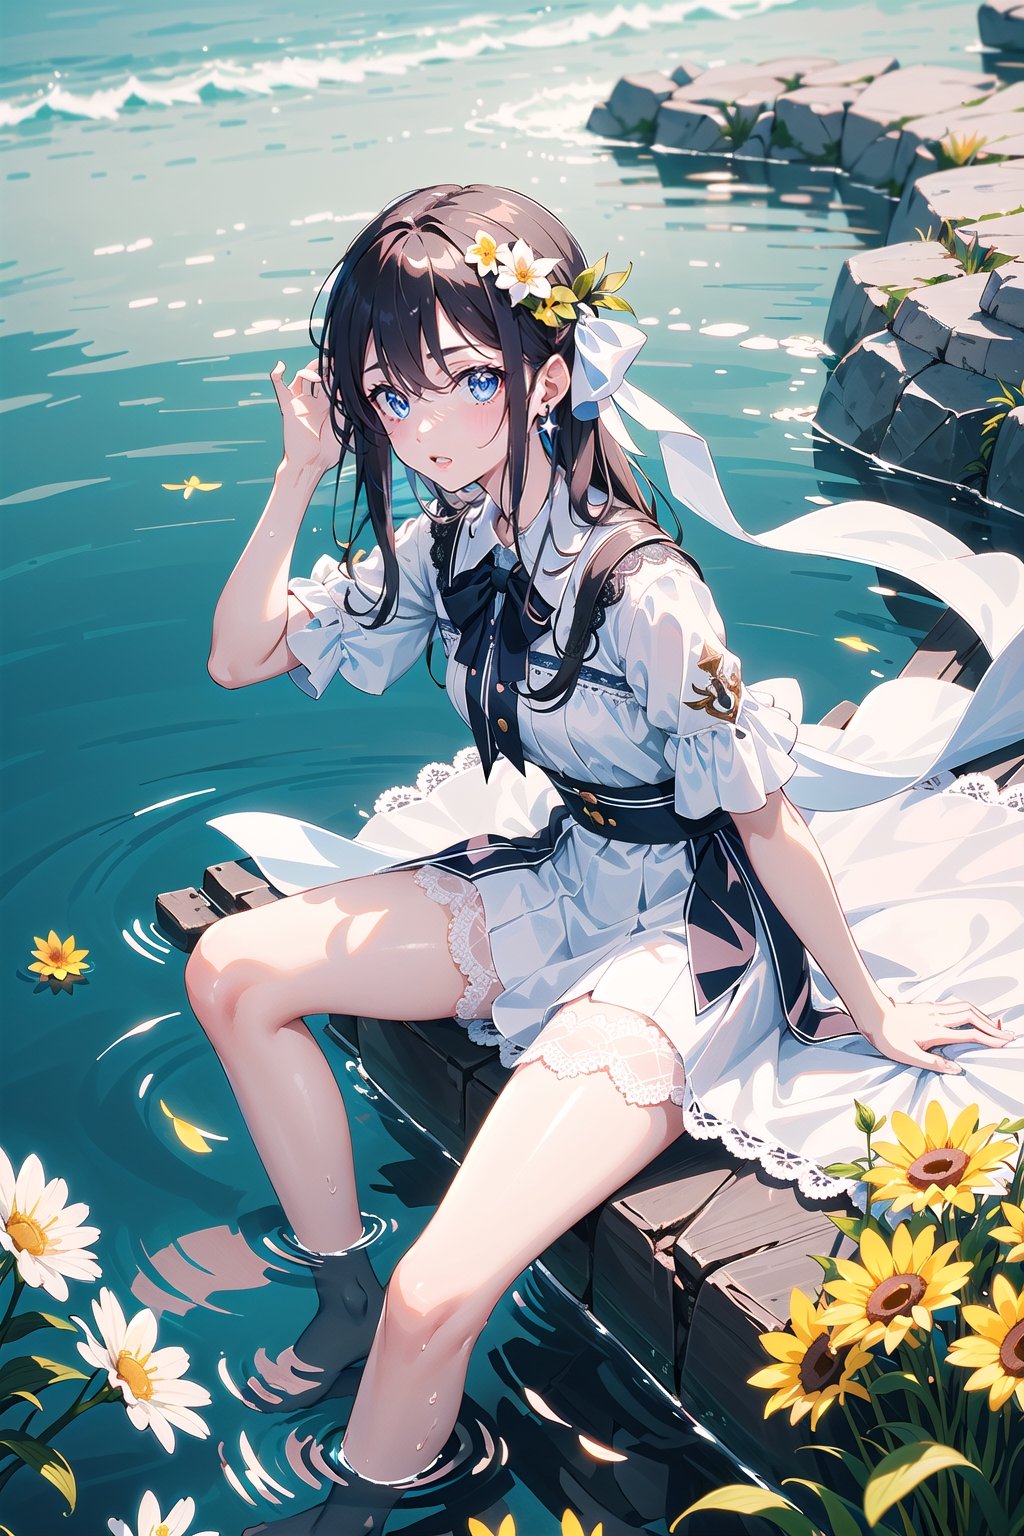 masterpiece, best quality, 1 girl, flowers, floral background, nature, pose, perfect hands, modern outfit, detailed, sparkling, sitting, lace detail, long hair, ultra detailed, ultra detailed face, clear eyes, good lighting,, perfect anatomy, stylish white outfit, different hairstyles, hair ribbons, front view, from above, water effect